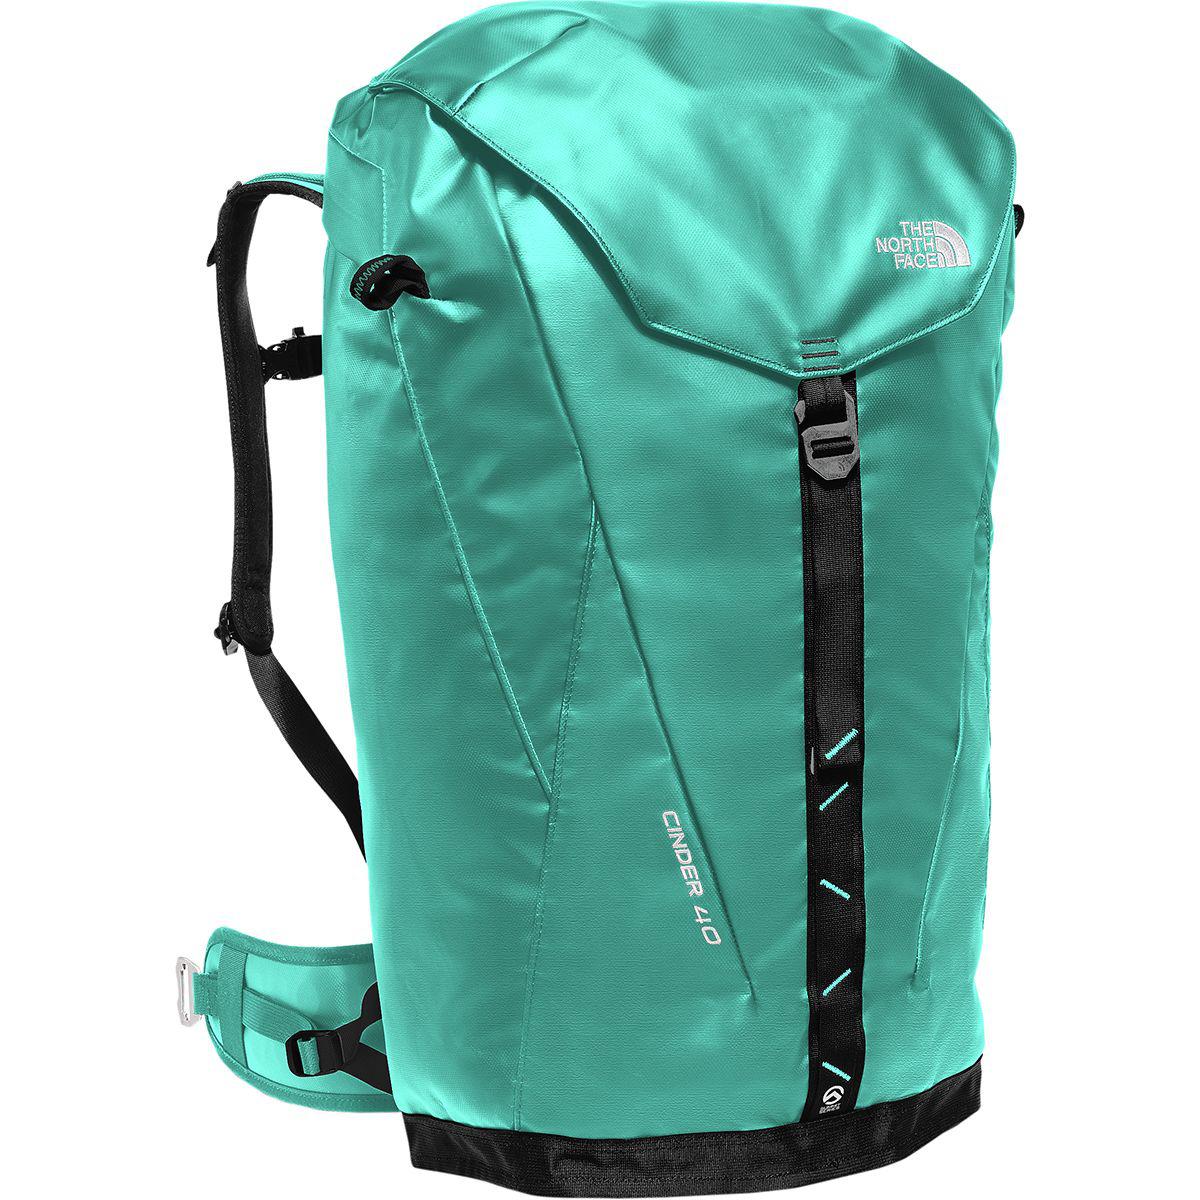 The North Face Synthetic Cinder 40l Backpack in Green for Men - Lyst